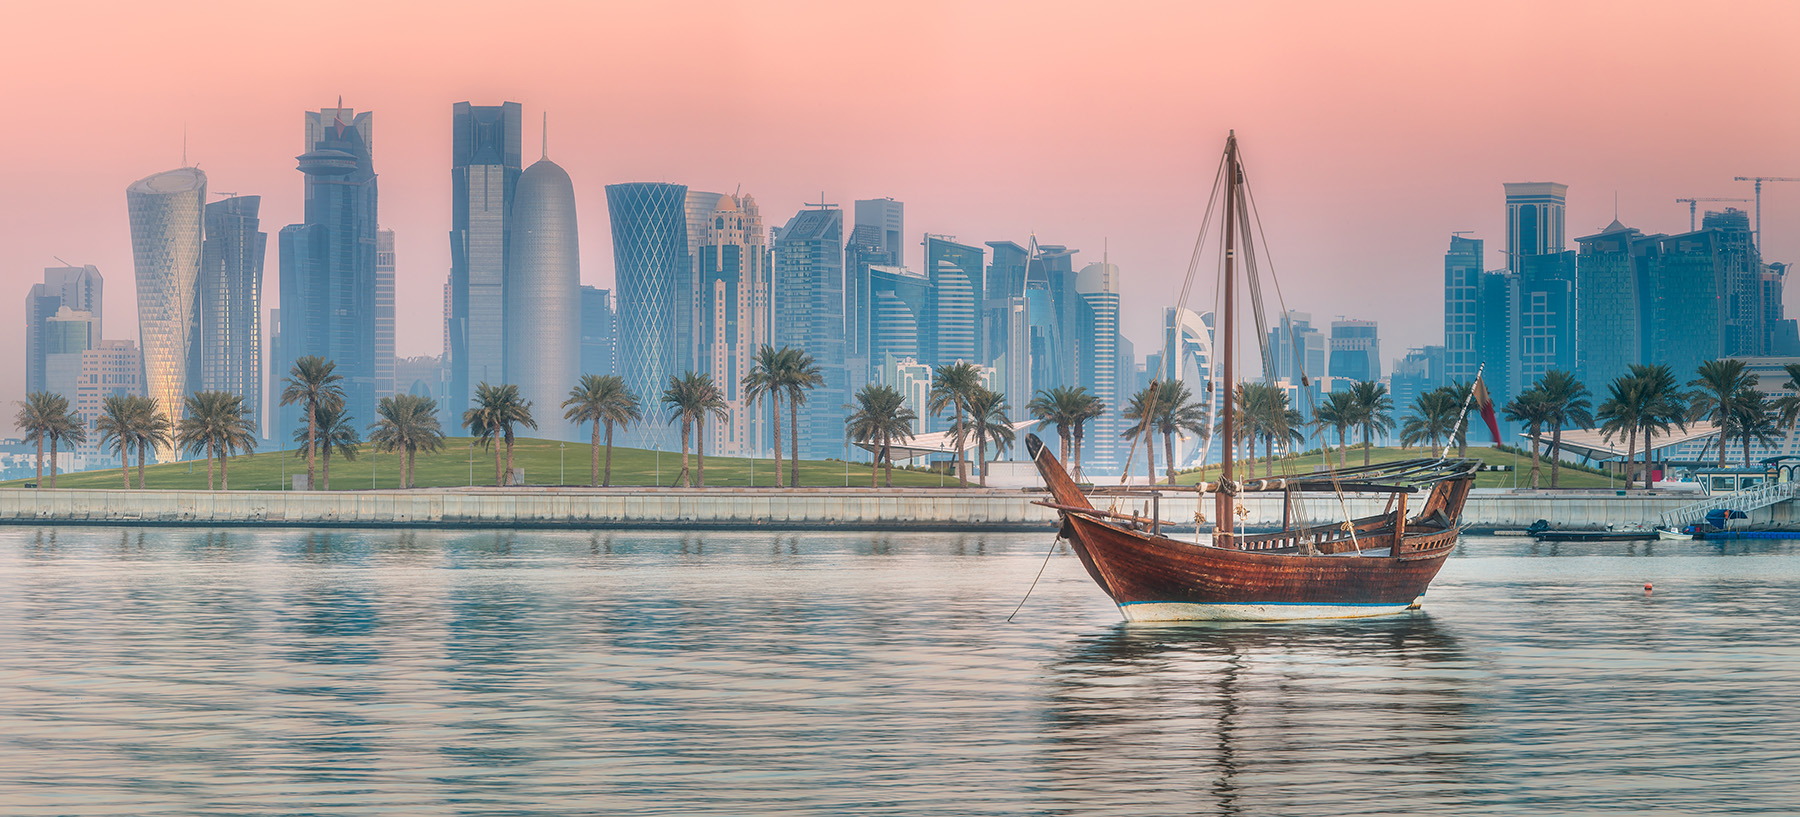 The photograph shows a dhow, an Arabian boat that inspired the design of the Al Janoub stadium, sailing on water with an urban skyline in the background. 